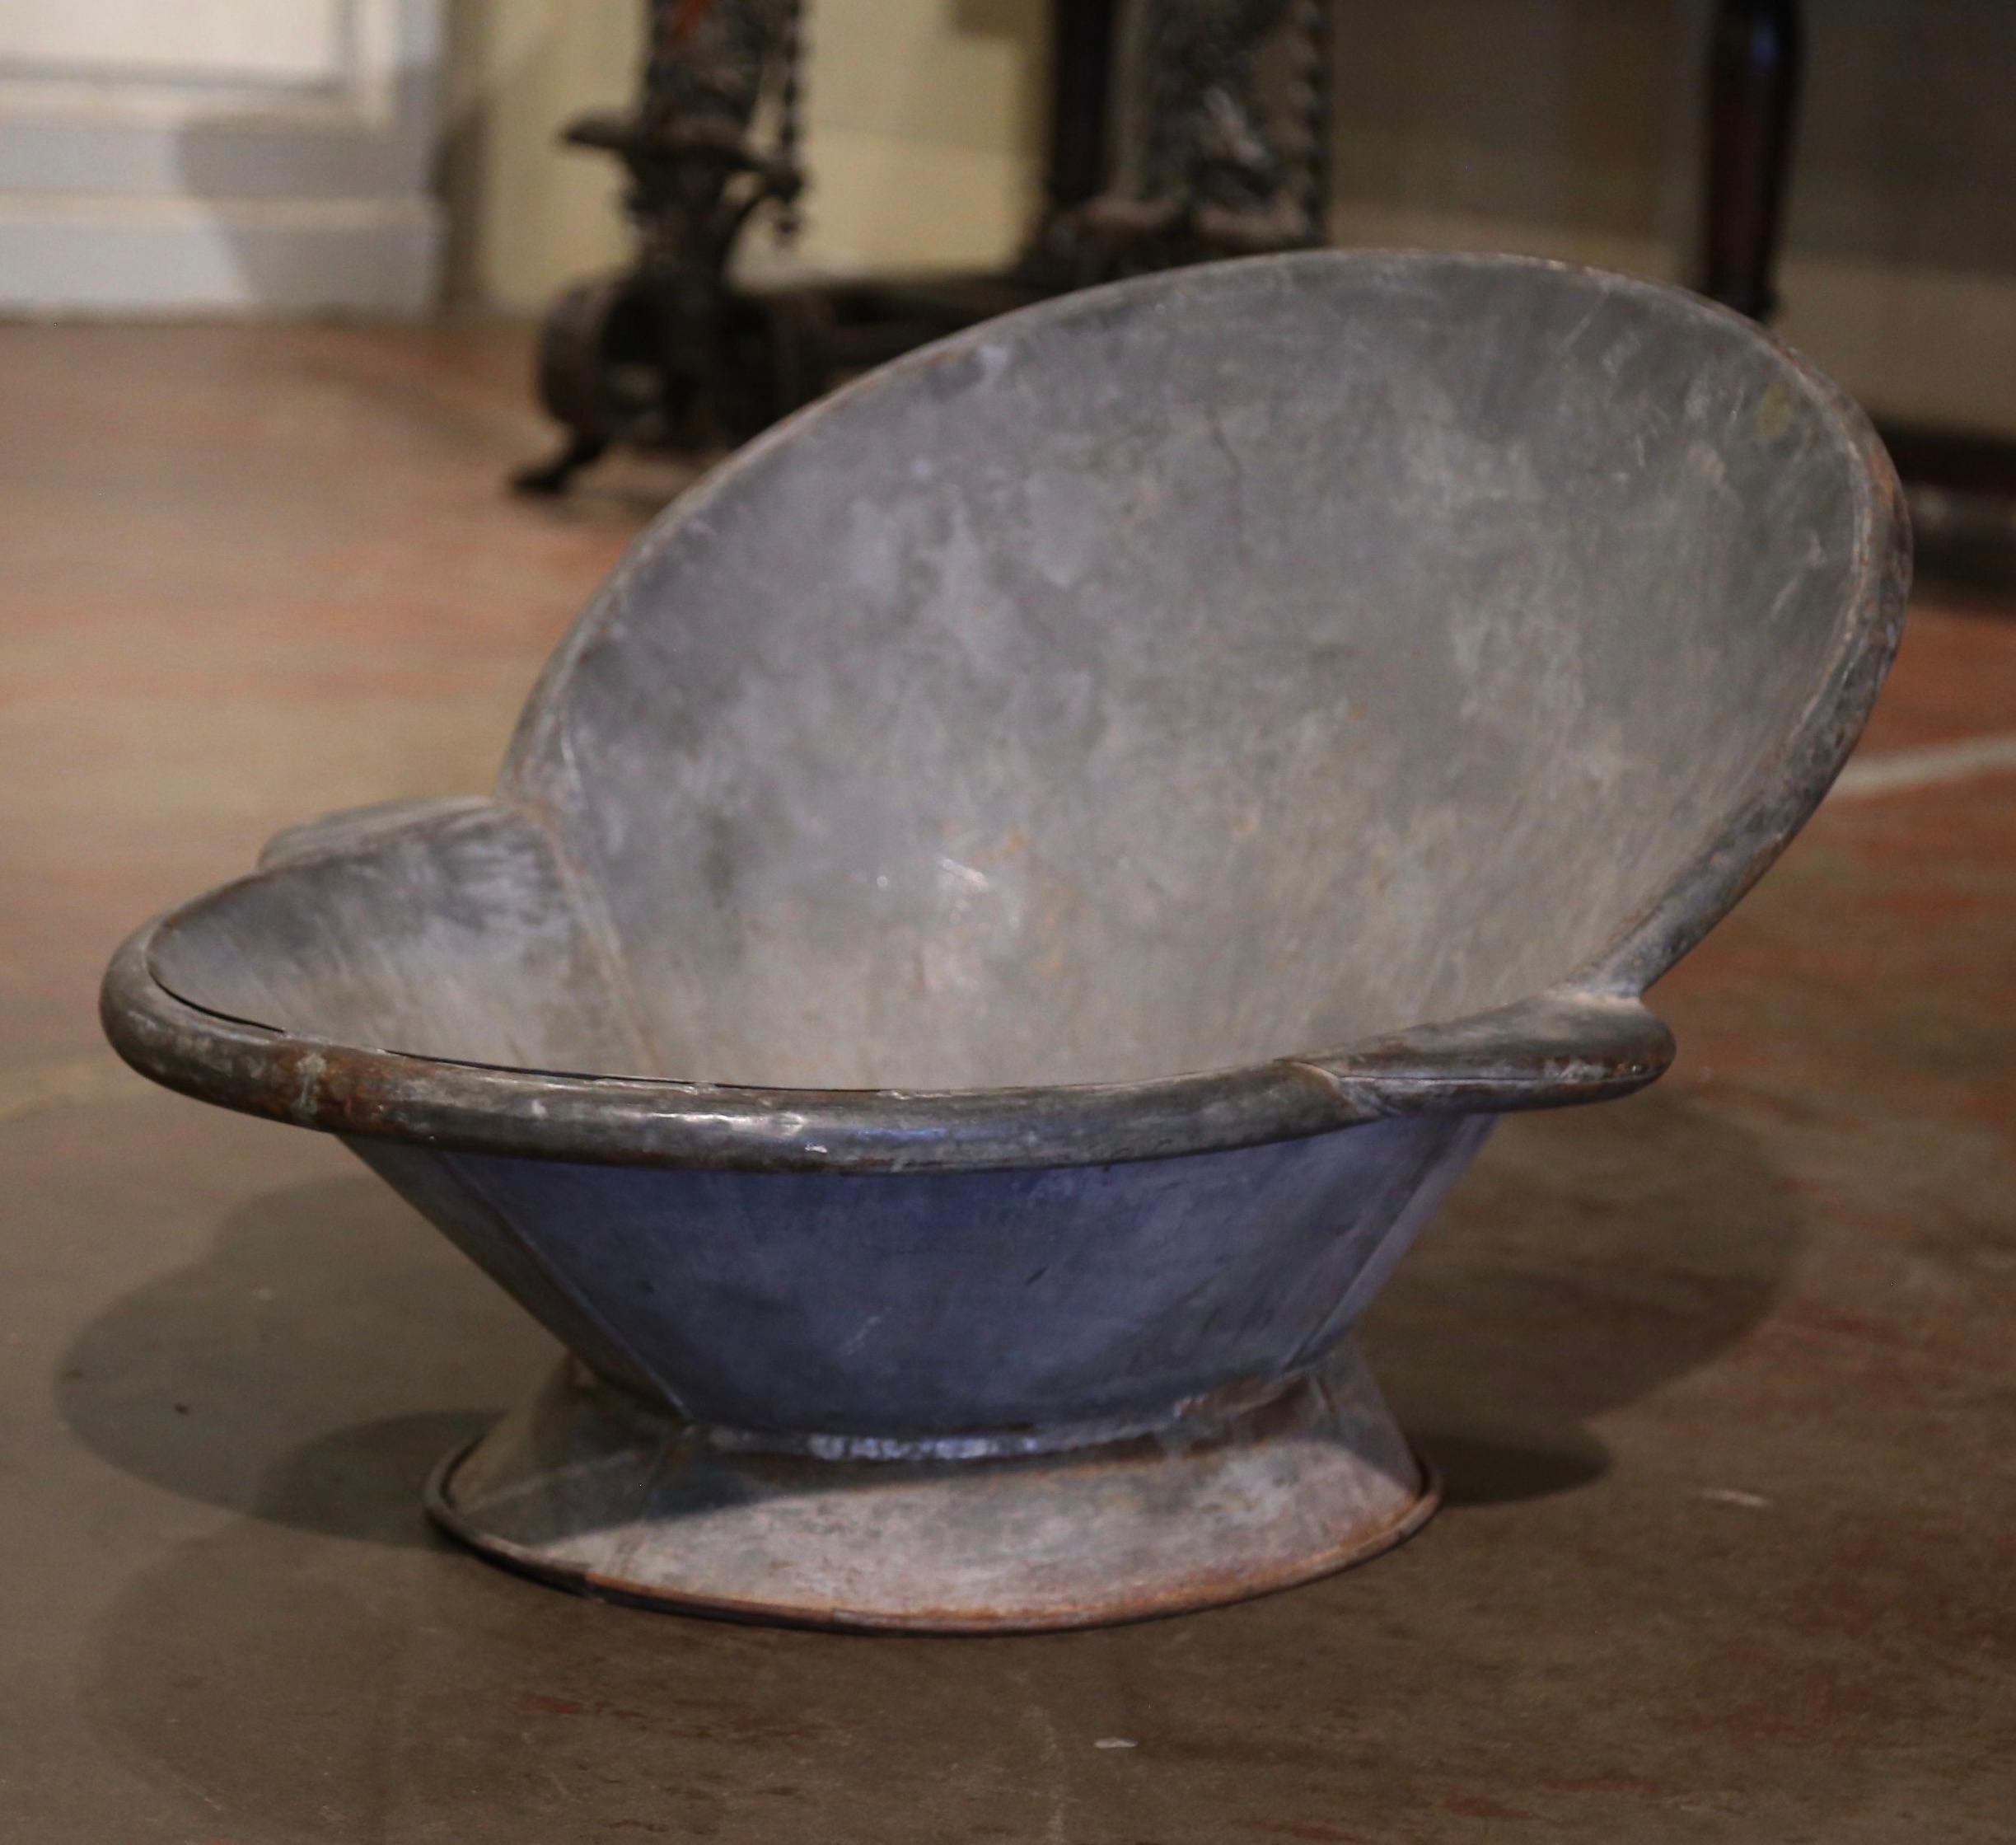 Use this decorative antique wash tub as a jardinière or a drink cooler! Crafted in France, circa 1880, the oval shaped baby bathtub features two sturdy metal grips on either side and roll edges around the rim. The solid tub is in good condition